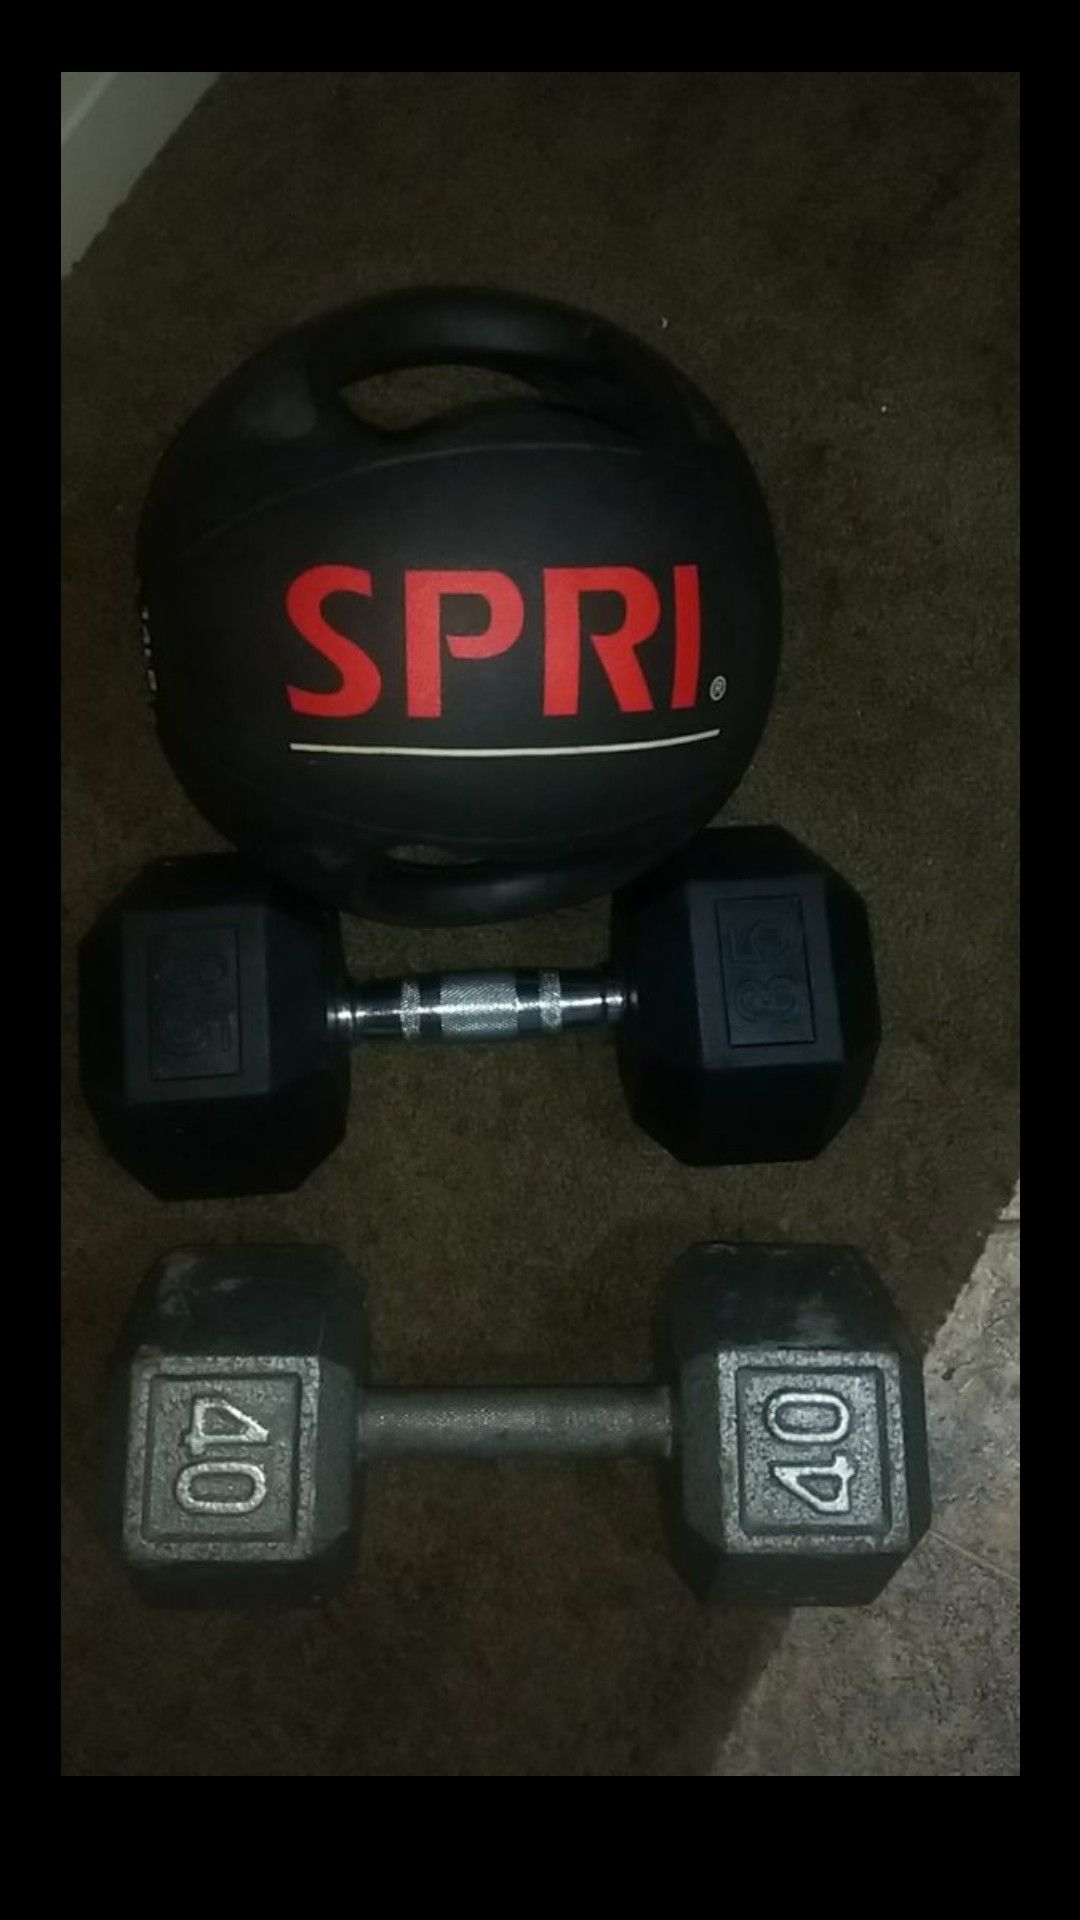 Dumbells and ball weights all for $50